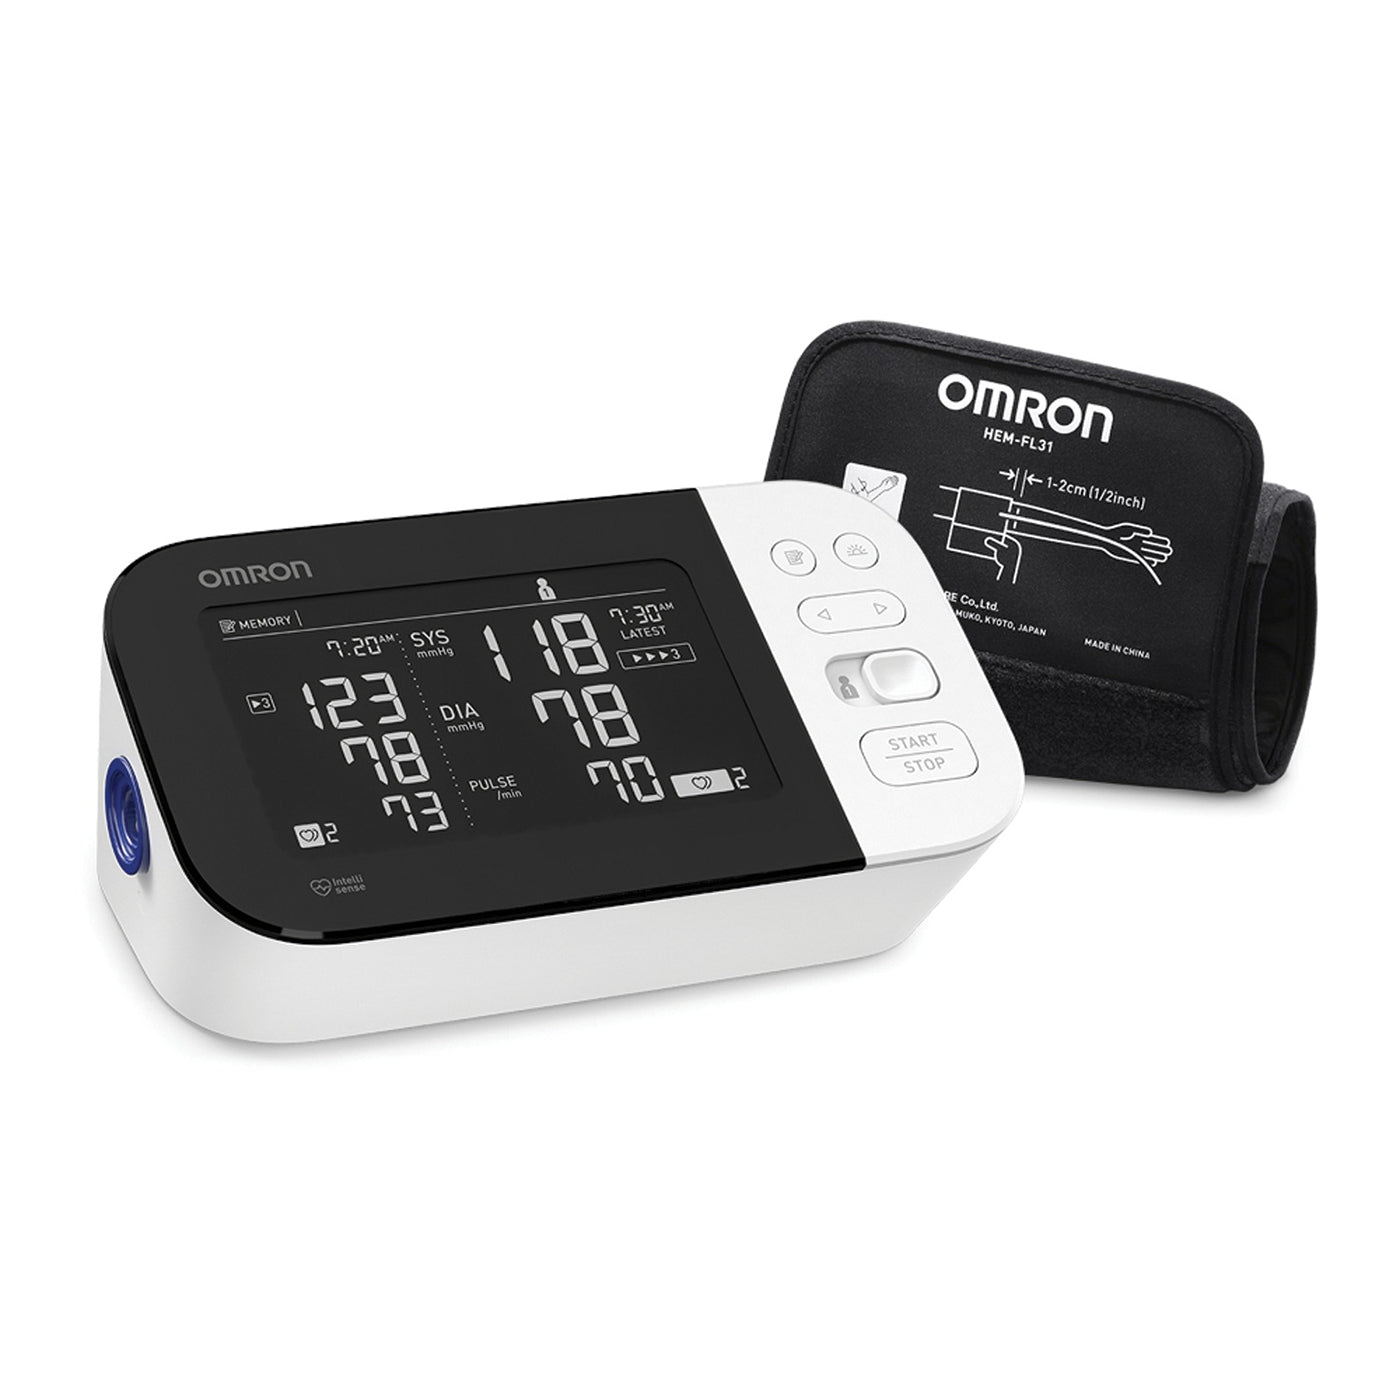 Omron BP5250 Silver Wireless Upper Arm Blood Pressure Monitor, For Clinic,  0.01 (Pressure)